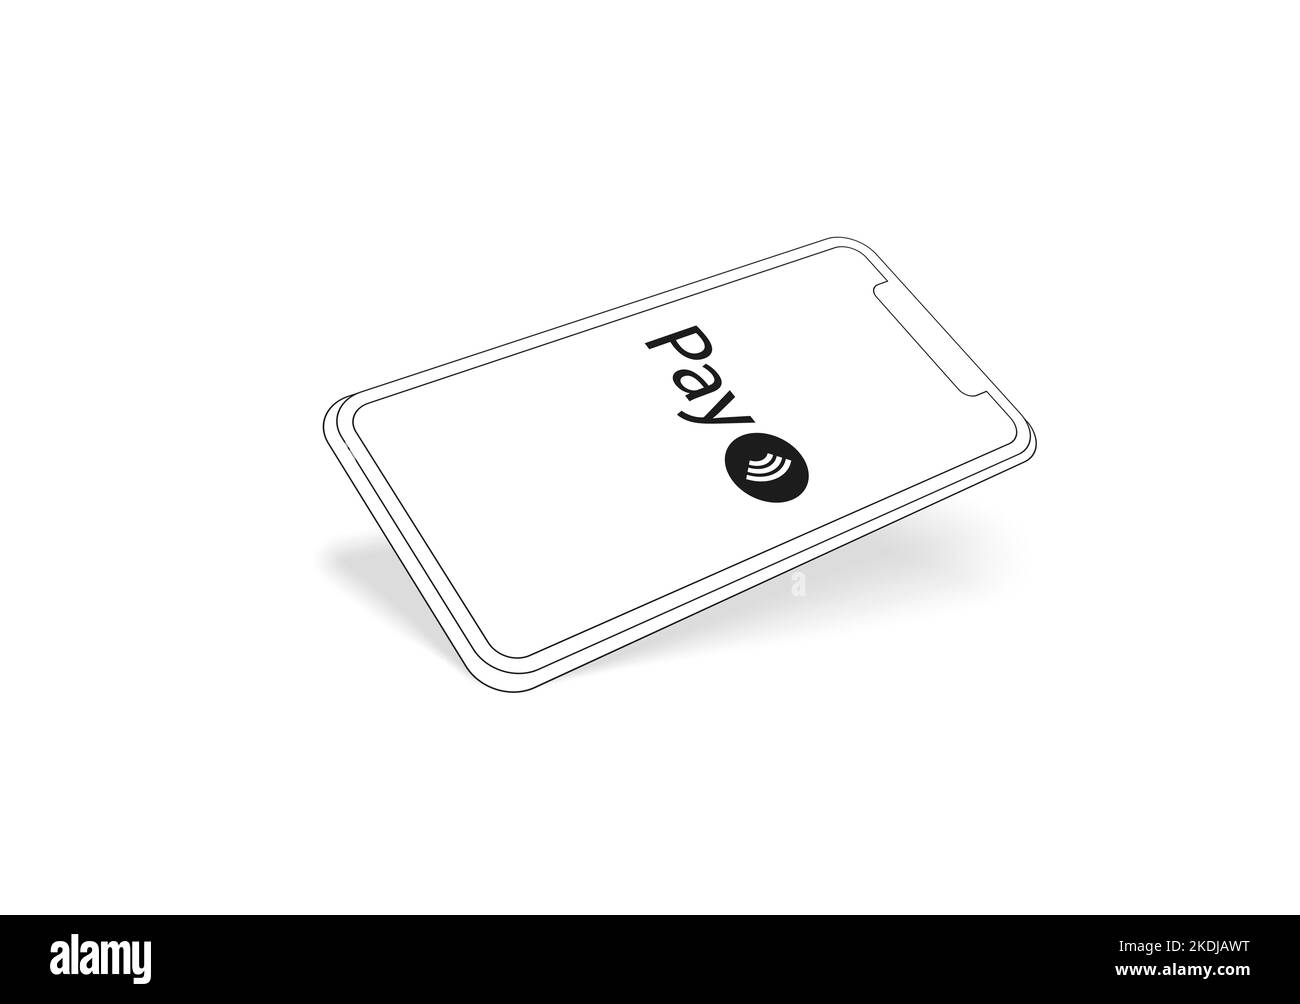 3D illustration of a smartphone with which contactless payments can be made as a contour drawing Stock Photo